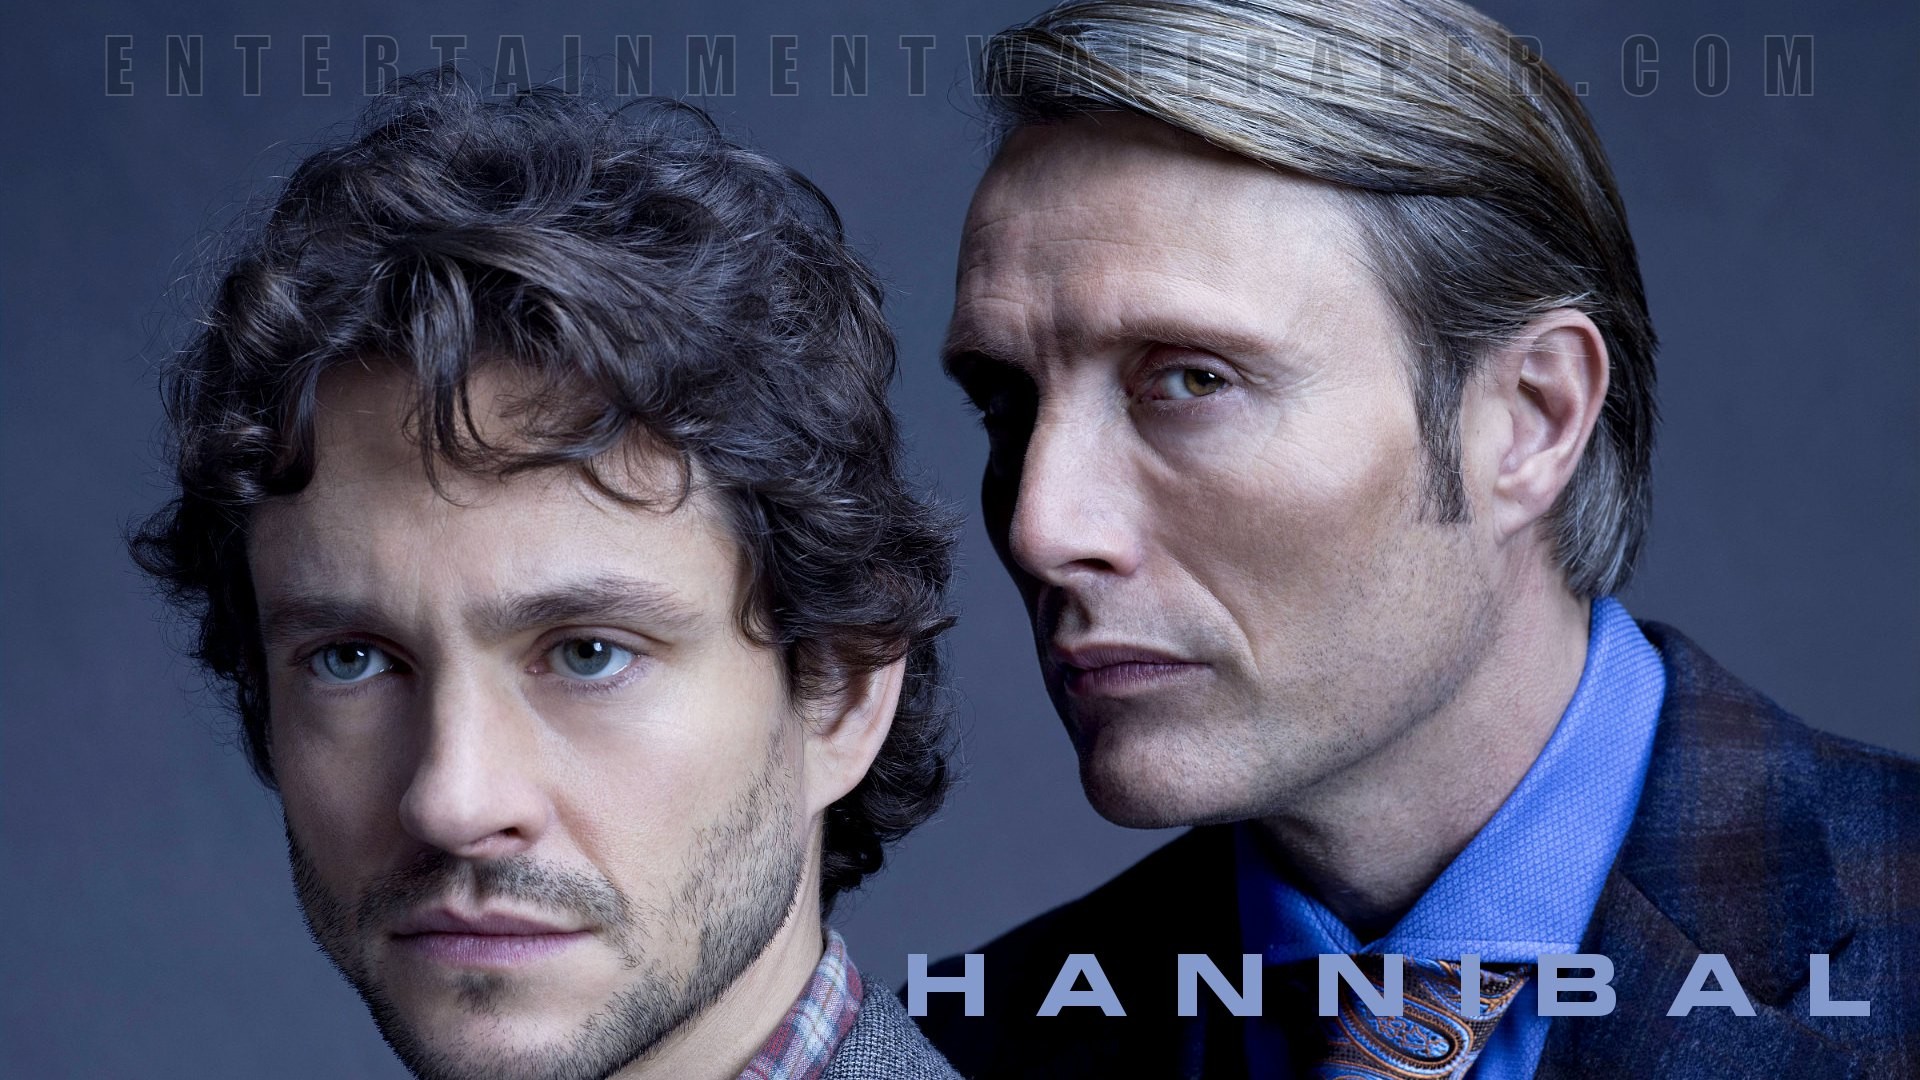 1920x1080 Hugh Dancy and Mads Mikkelsen as Will Graham and Hannibal Lecter in Hannibal